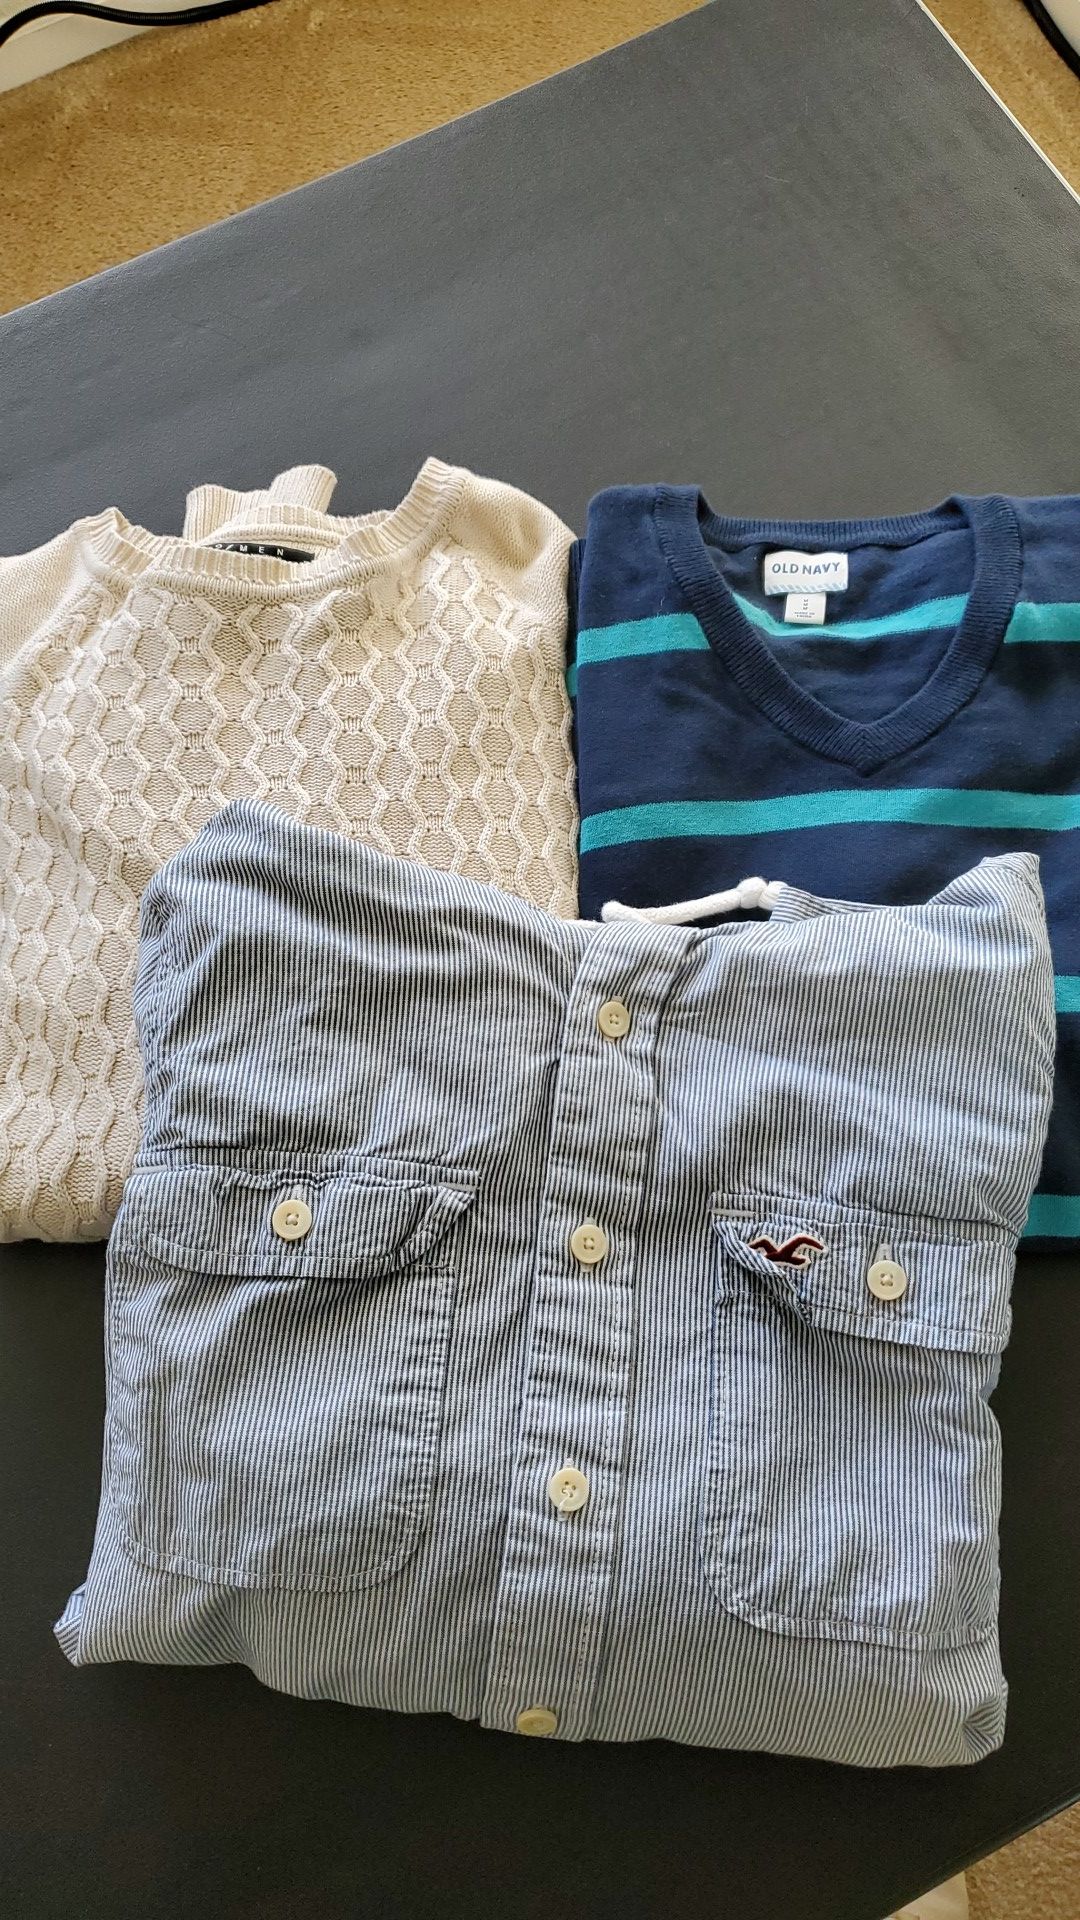 Old Navy, 21 Mens, and Hollister Mens sweaters.